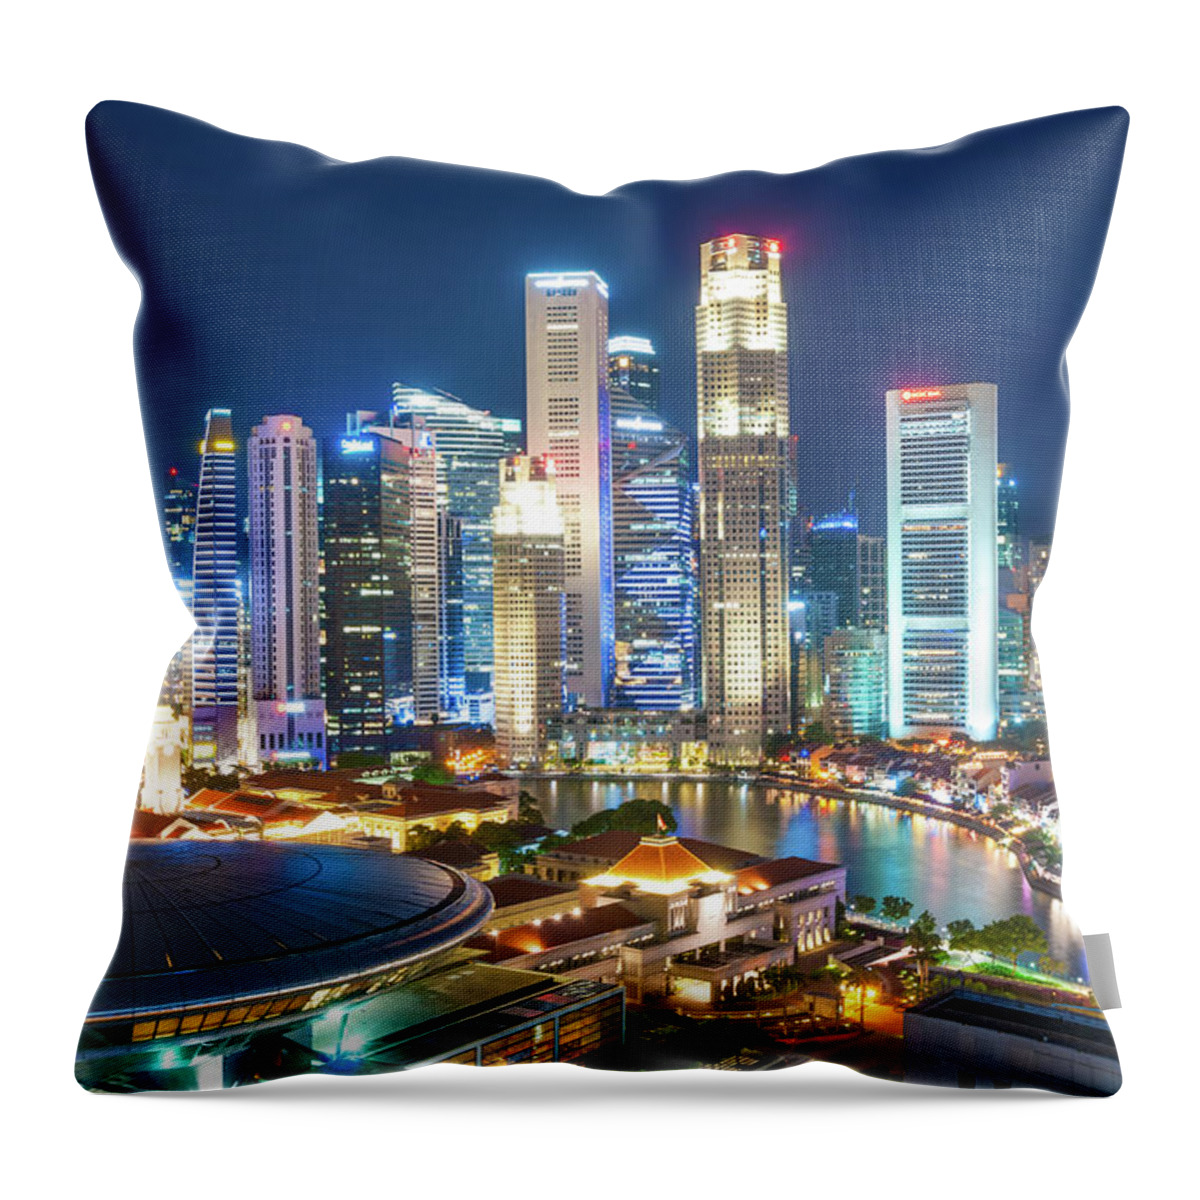 Panoramic Throw Pillow featuring the photograph Singapore At Dusk by Primeimages